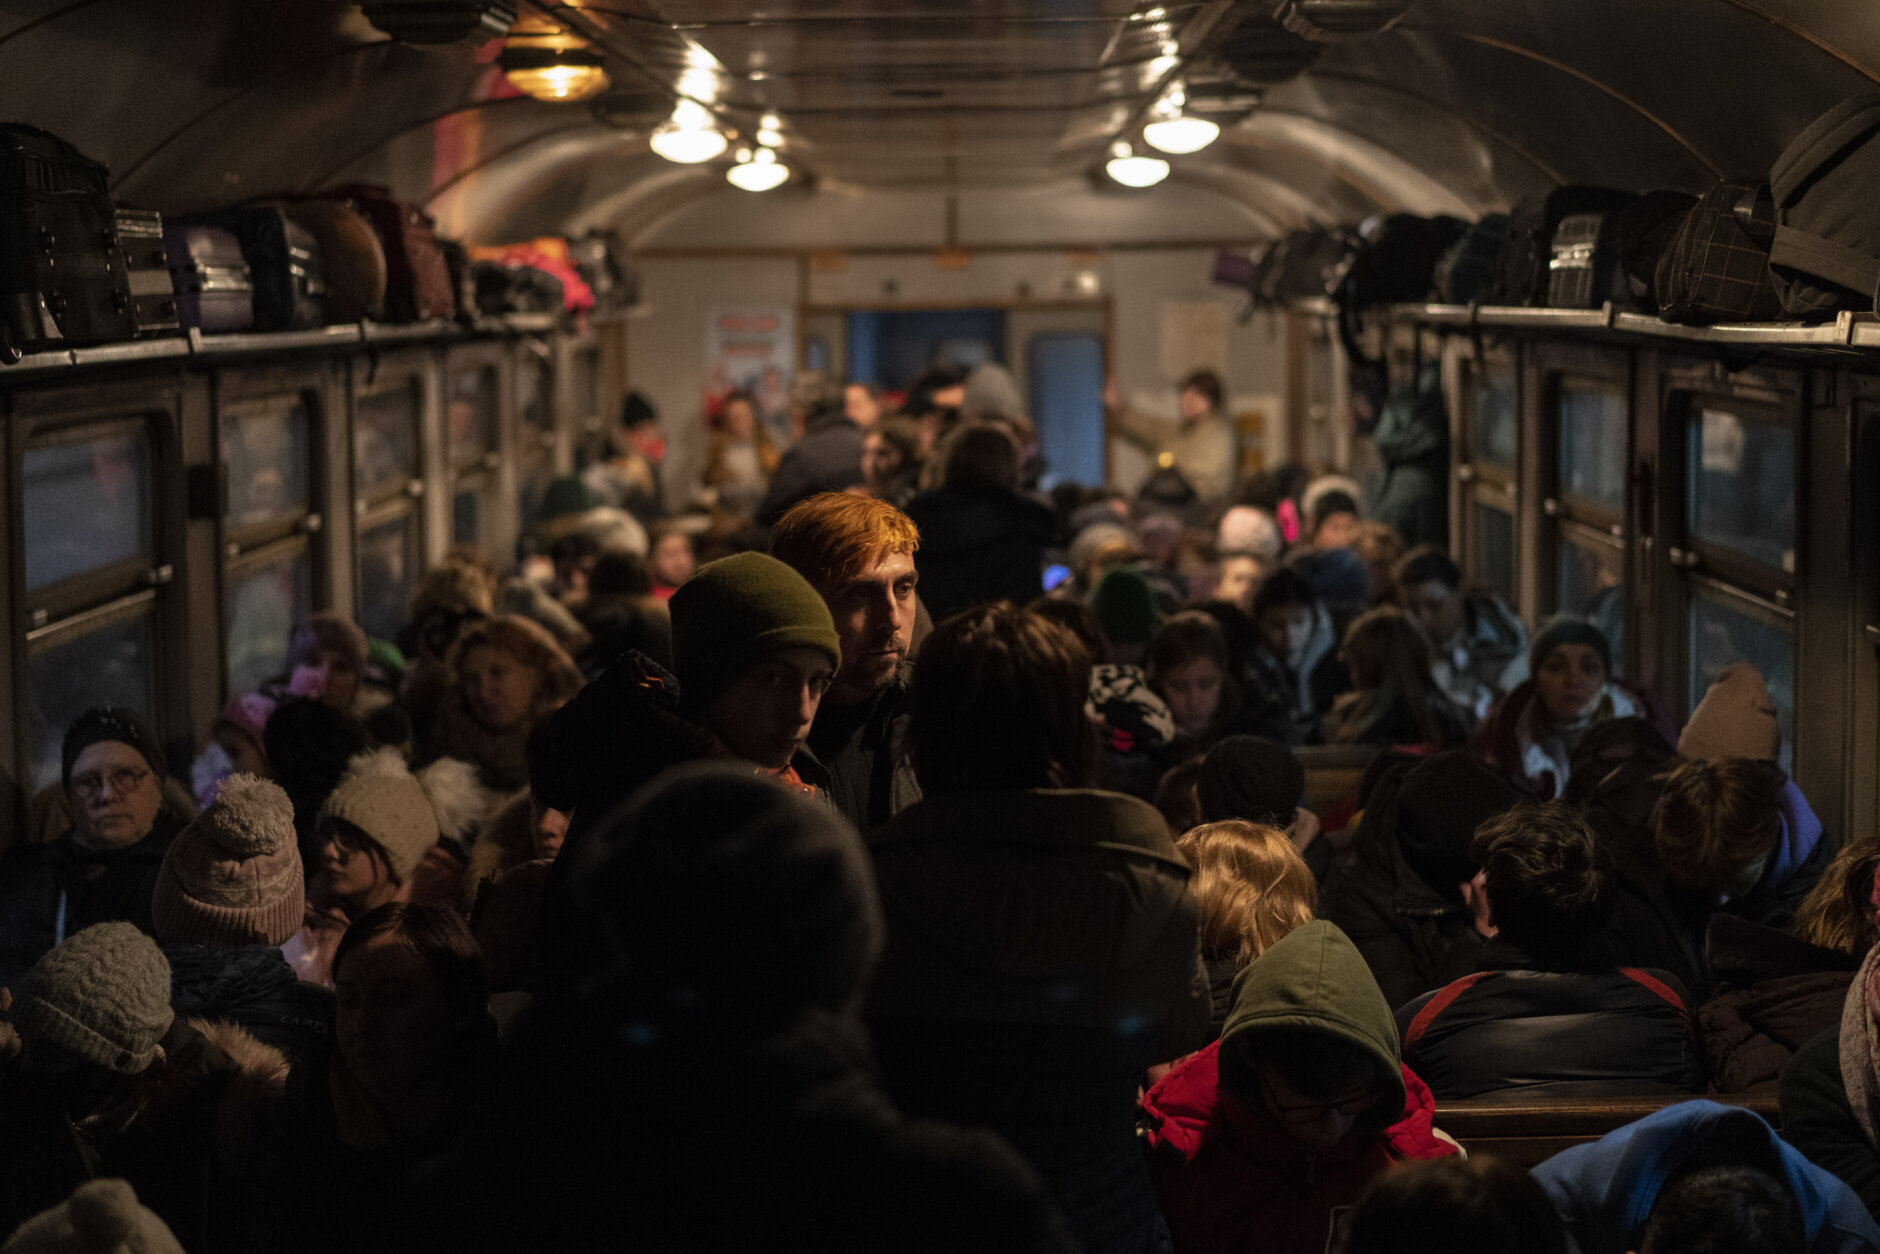 <p>Displaced Ukrainians onboard a Poland bound train in Lviv, western Ukraine, Sunday, March 13, 2022. Lviv in western Ukraine itself so far has been spared the scale of destruction unfolding to its east and south. The city&#8217;s population of 721,000 has swelled during the war with residents escaping bombarded population centers and as a waystation for the nearly 2.6 million people who have fled the country.</p>
